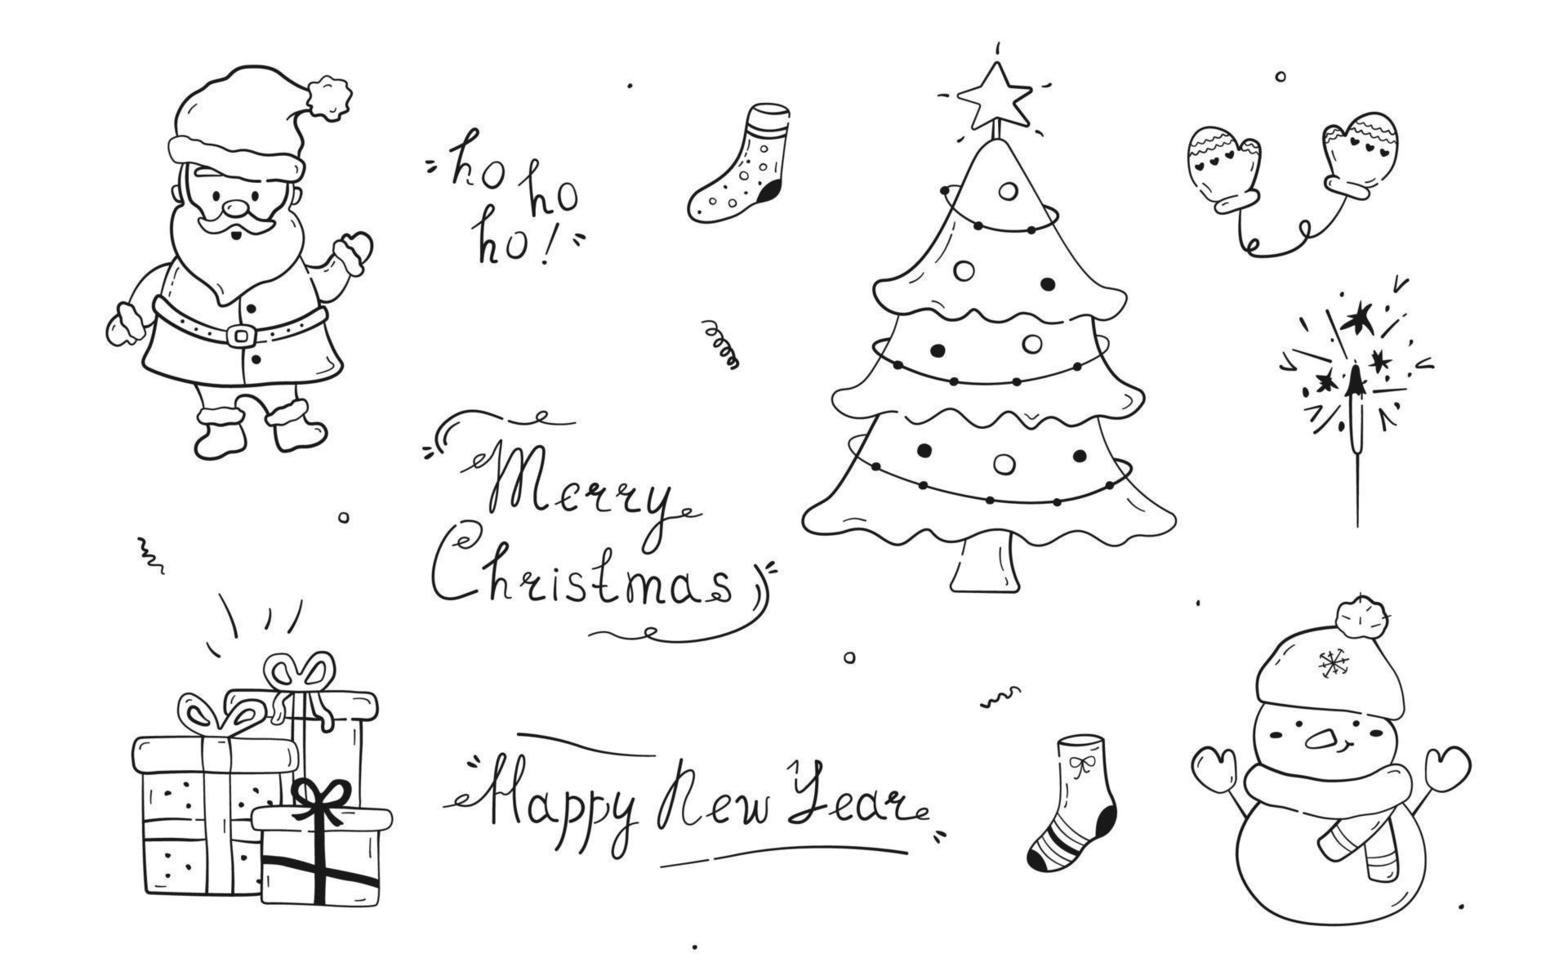 Collection of hand drawn New Year elements and lettering. Cute doodles set of santa, Christmas tree, snowman, sparkler, gift boxes, socks and mittens. Vector illustration